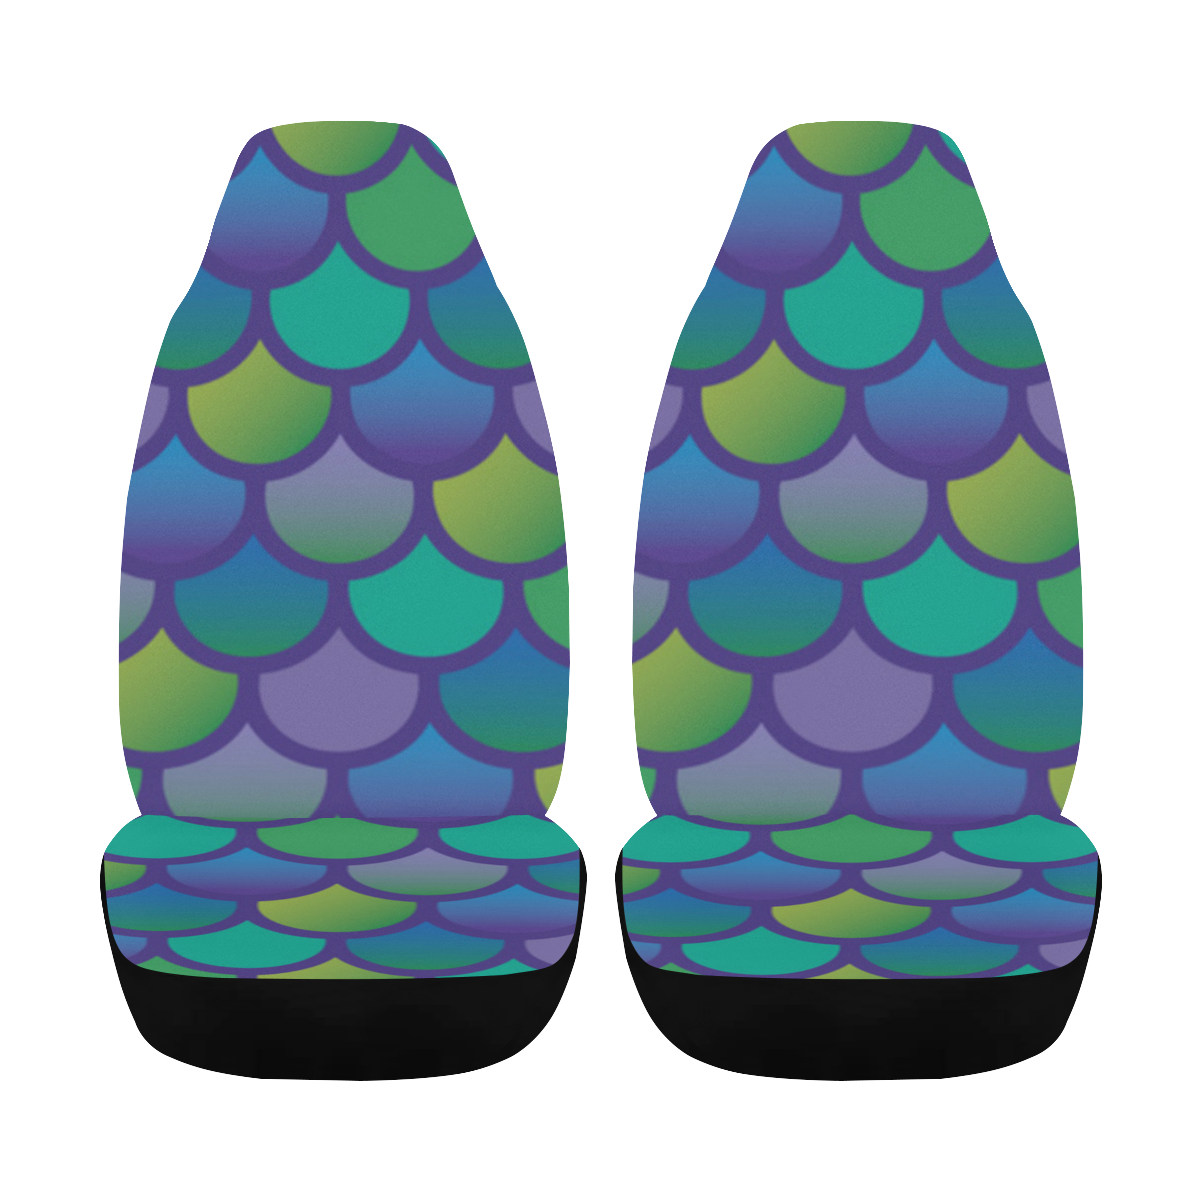 Mermaid SCALES multiCOLOR Car Seat Cover Airbag Compatible (Set of 2)